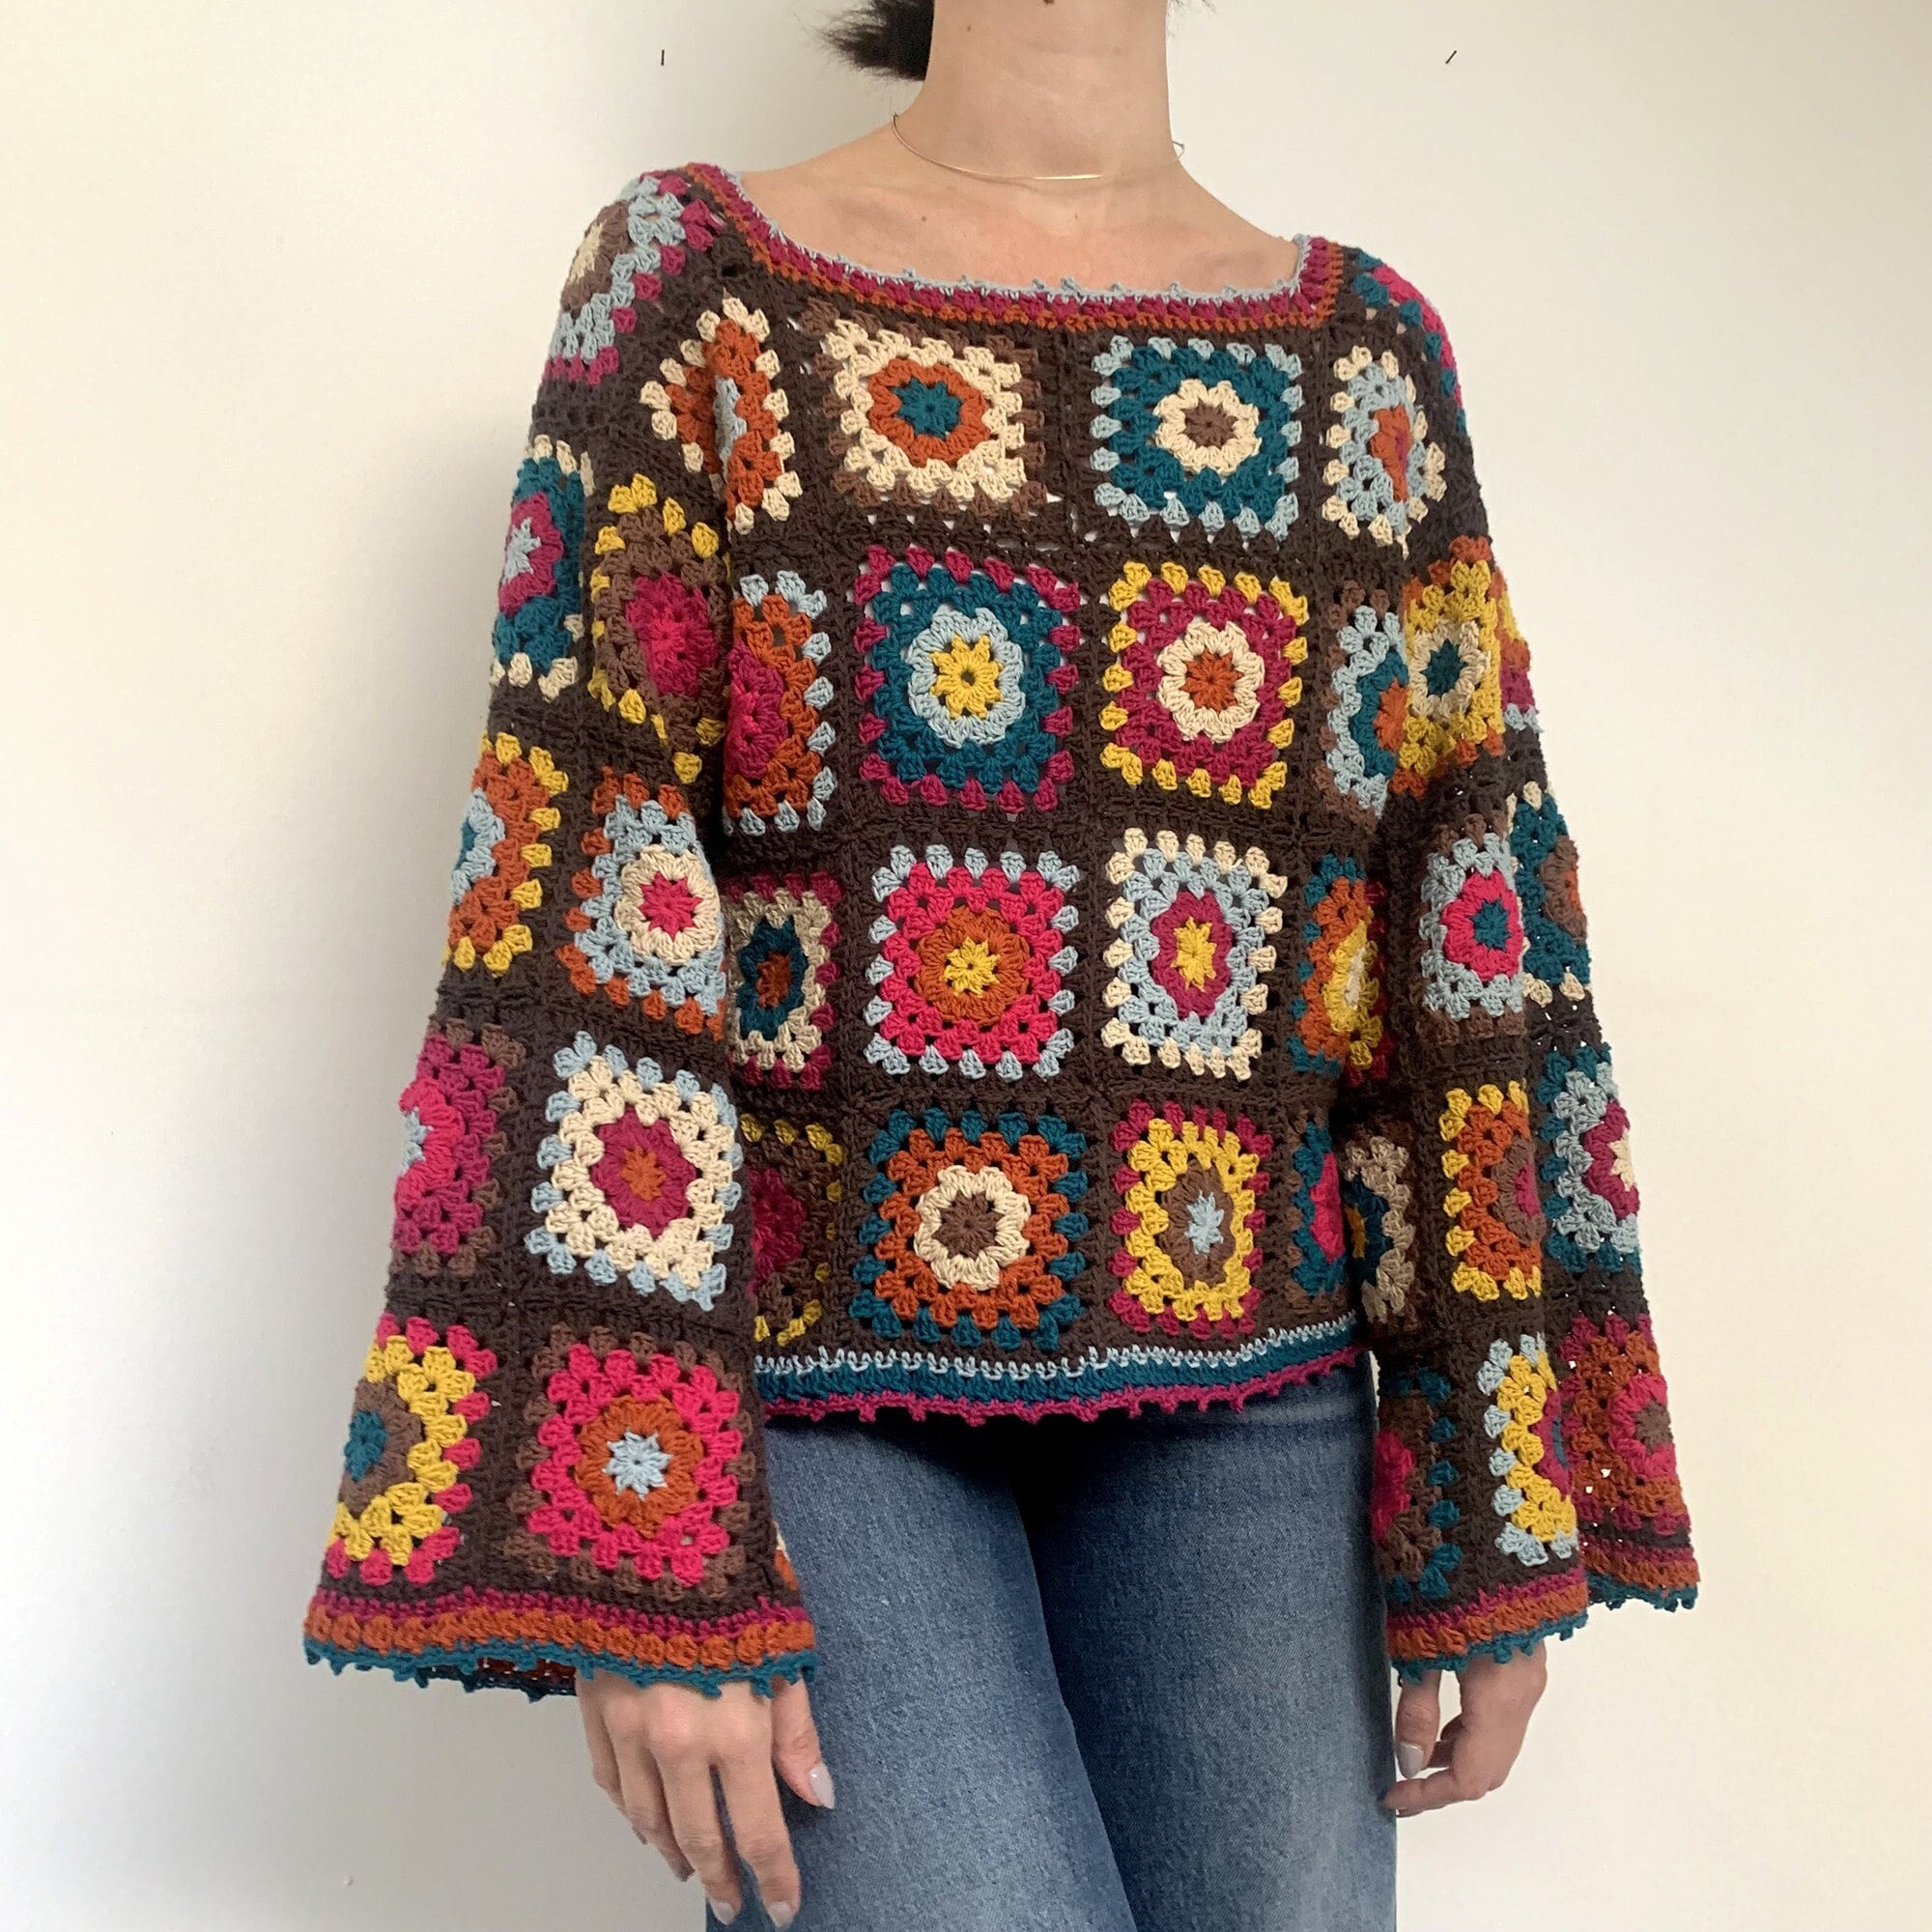 I Made This Pullover || Beginner-Friendly Granny Square Crochet PDF Pattern  — Just The Worsted | Modern Crochet Patterns | Free Tunisian Crochet and